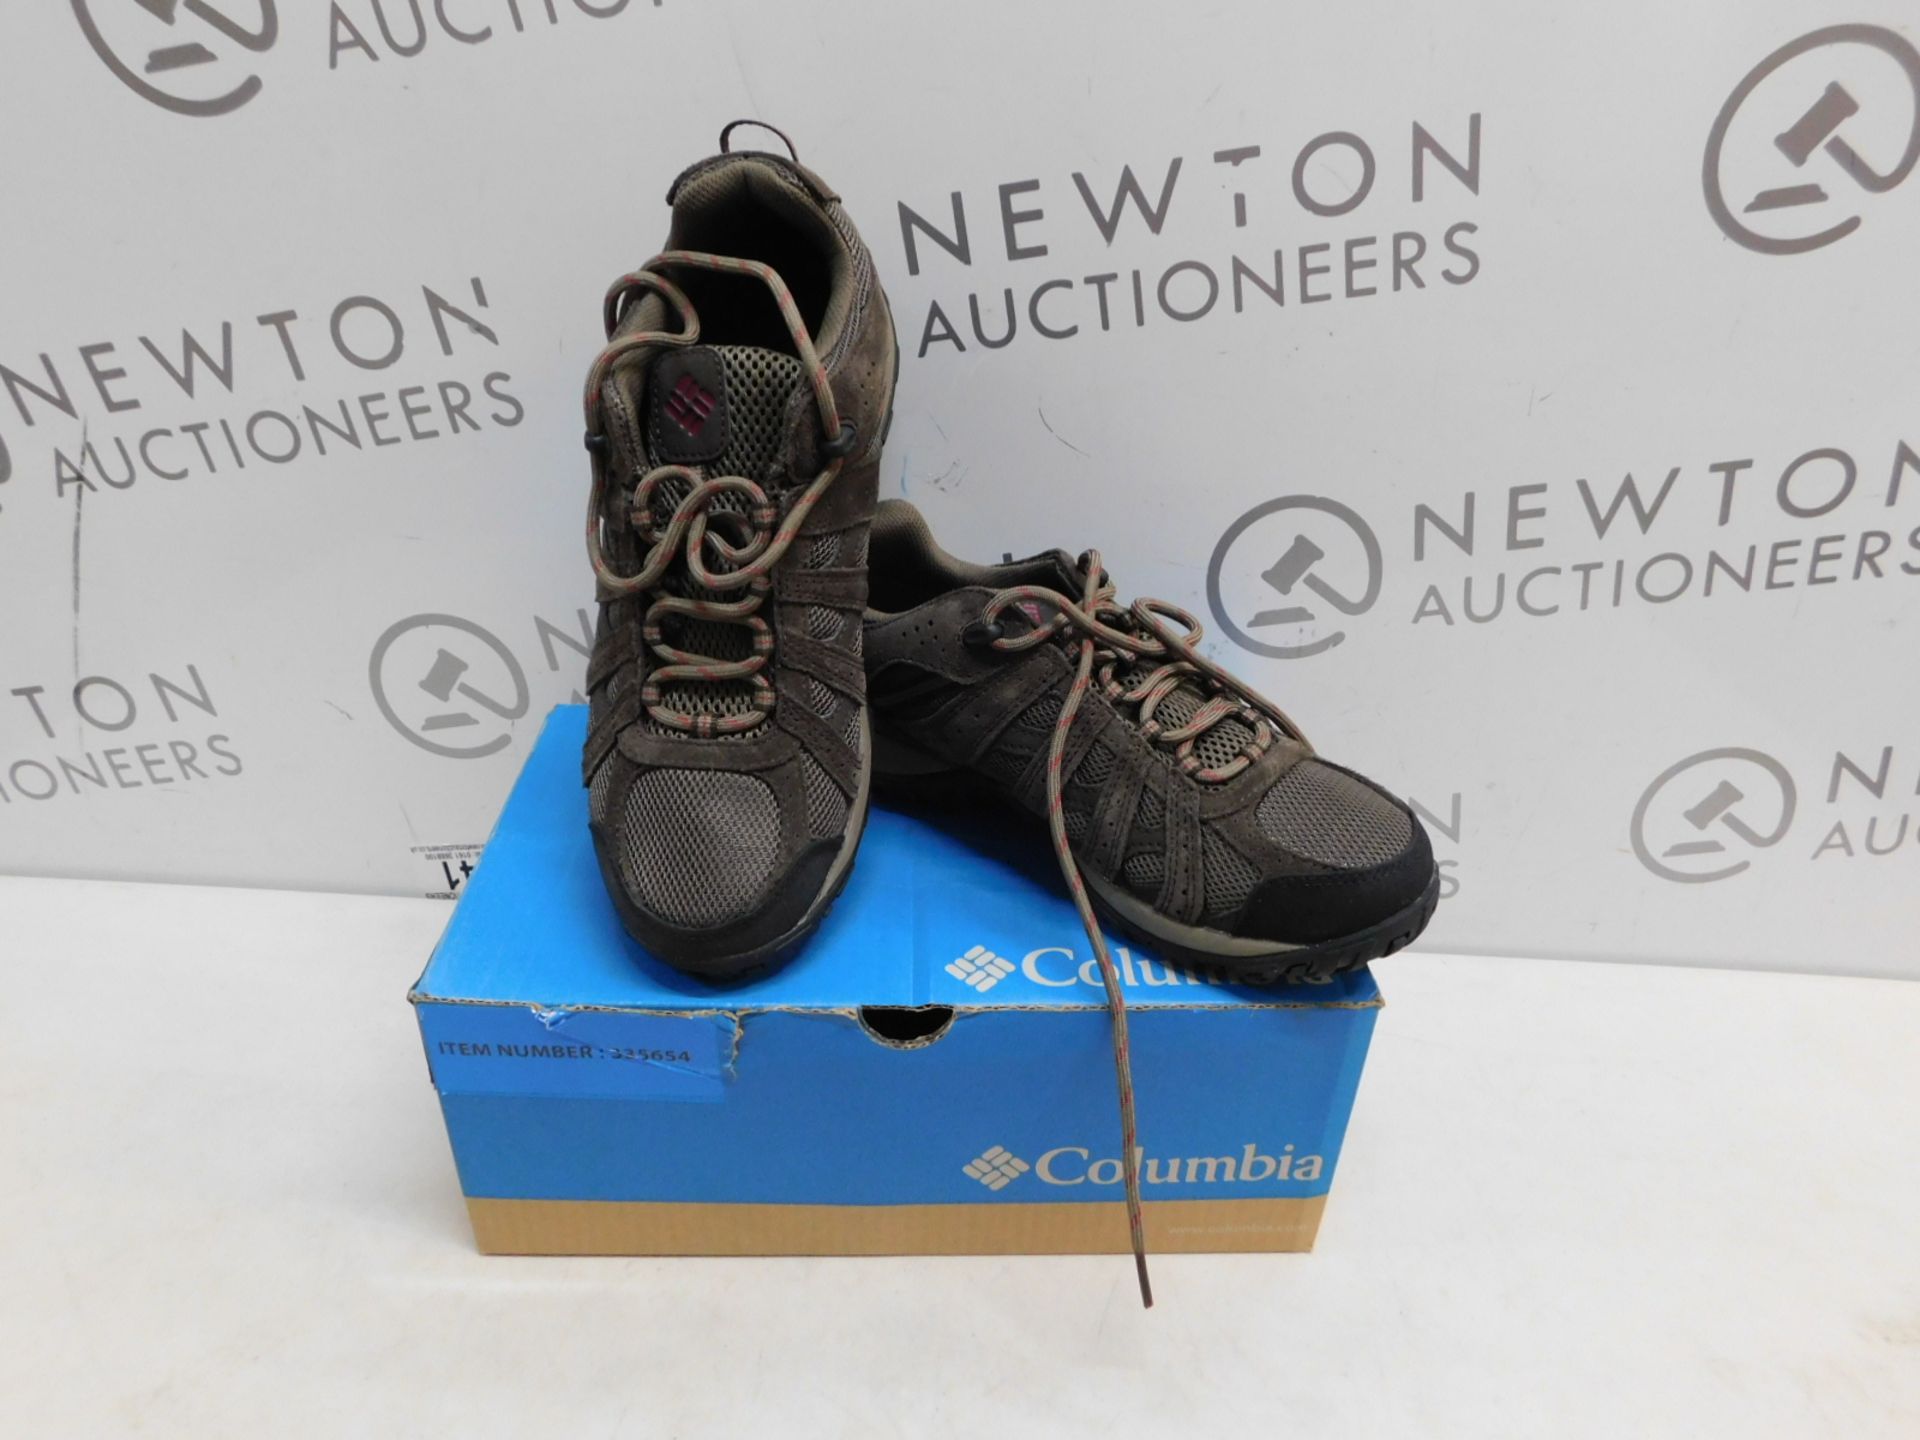 1 BOXED PAIR OF MENS COLUMBIA REDCREST WATERPROOF SHOES UK SIZE 7 RRP Â£79